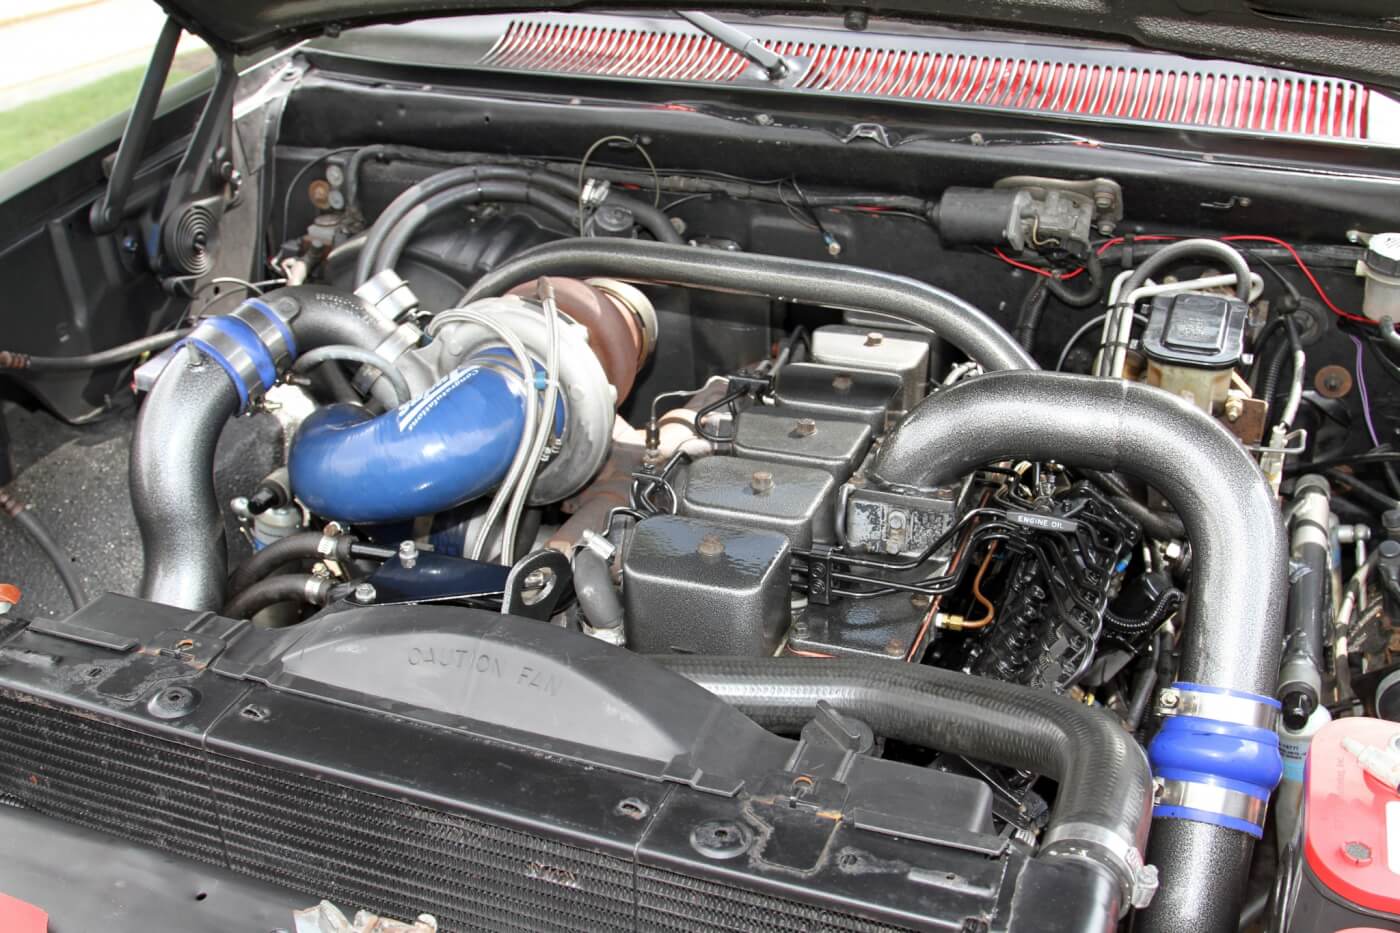 The crew cab W350s were discontinued before Dodge started using the Cummins engine, but that didn’t stop Reese from building his dream truck with a compound turbocharged Cummins 12-valve power plant.